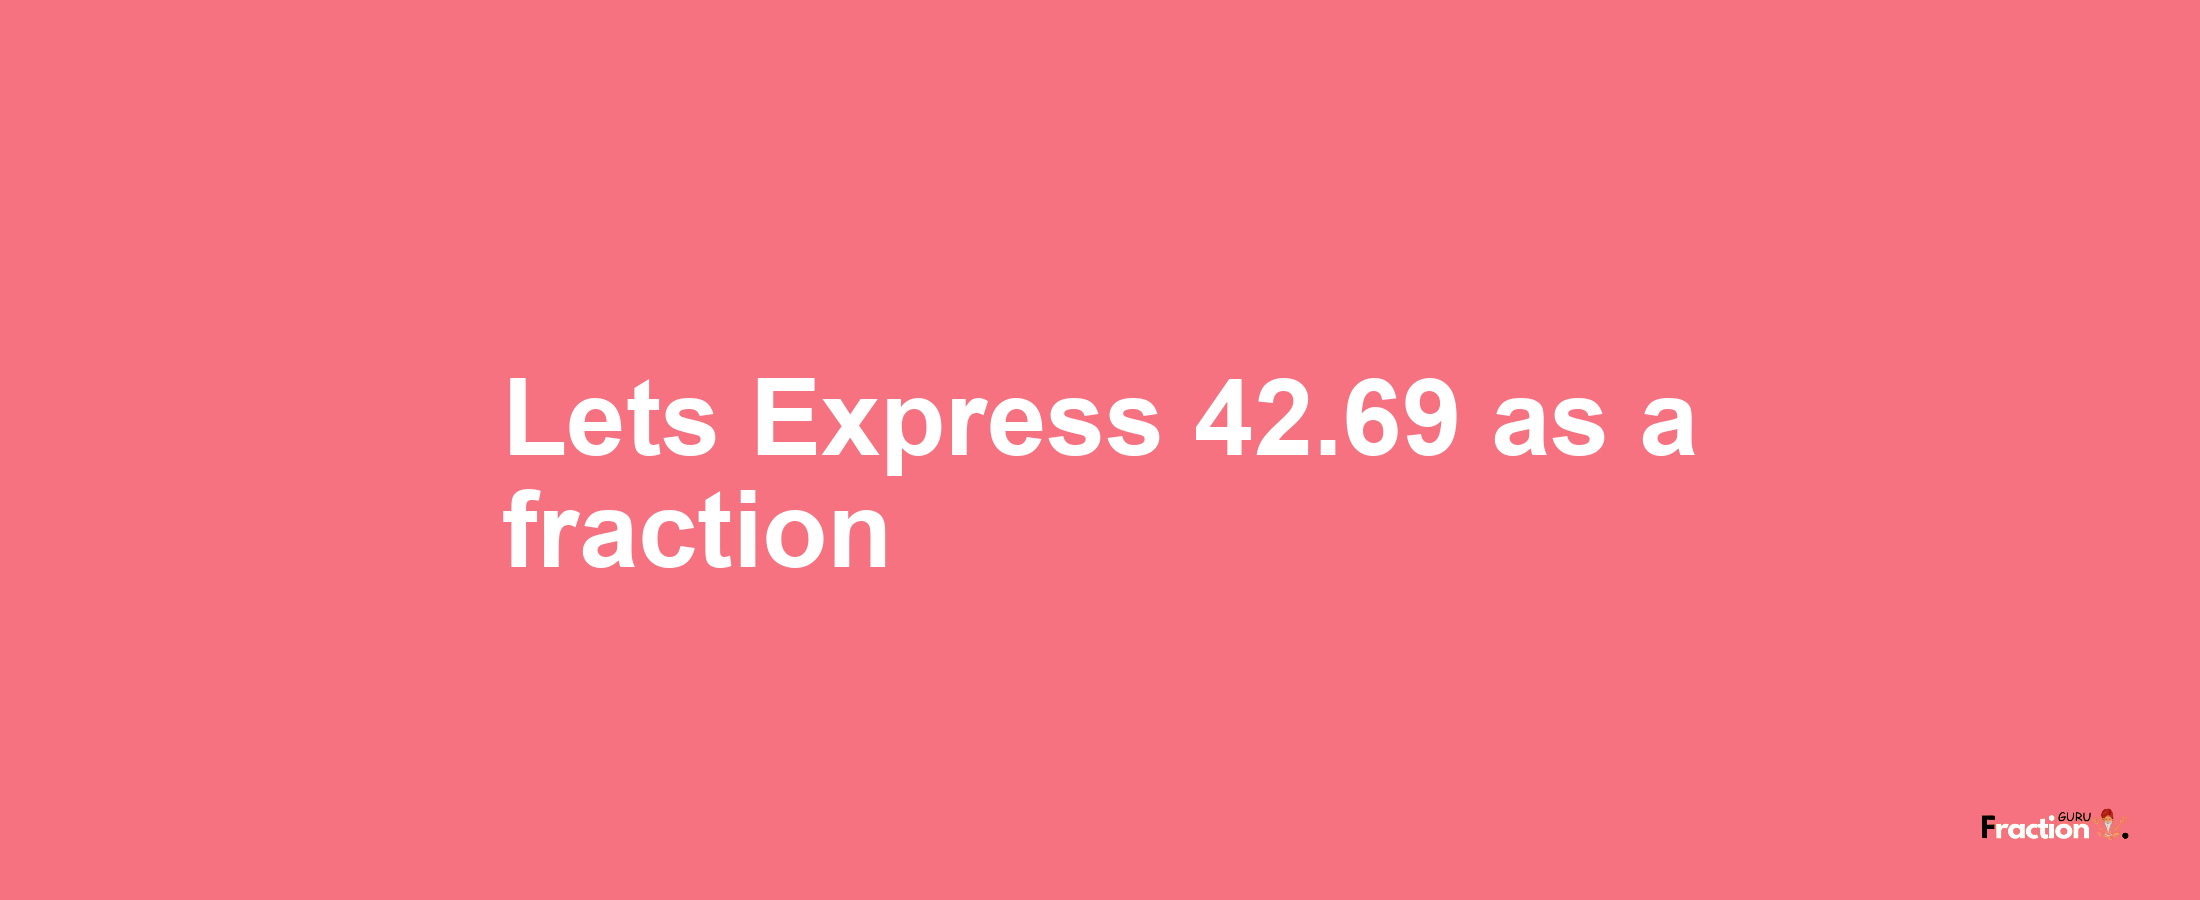 Lets Express 42.69 as afraction